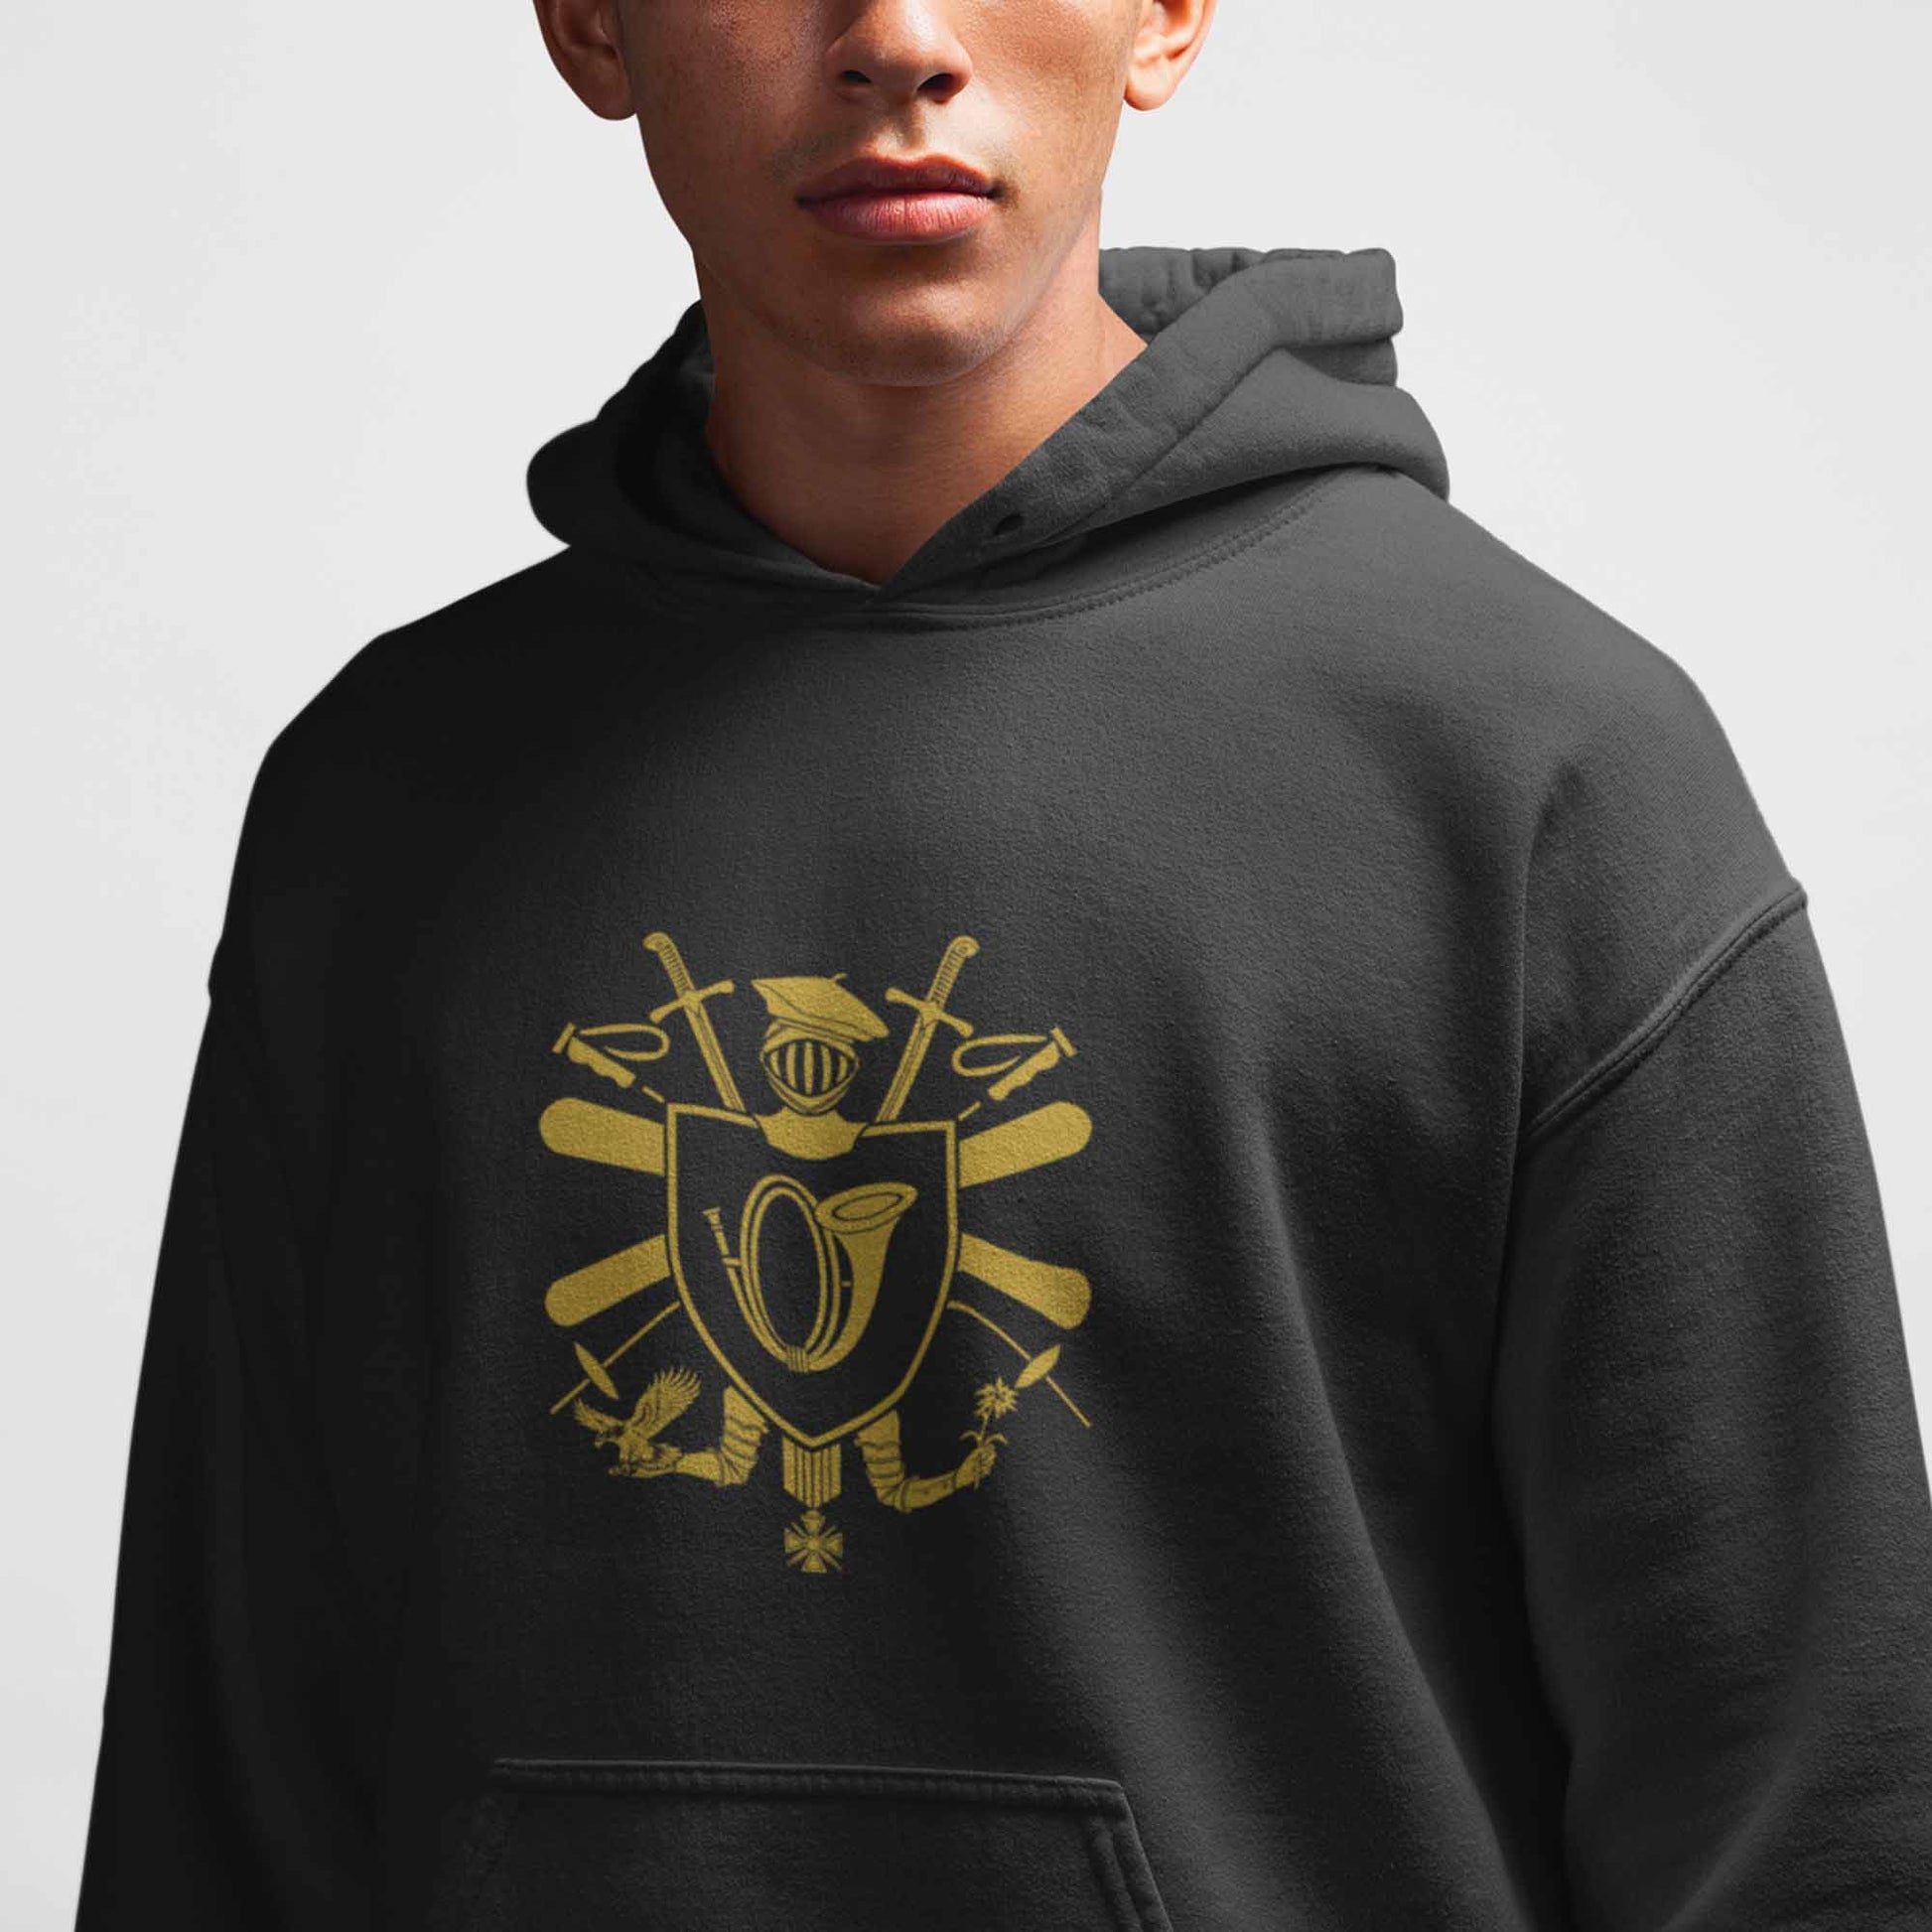 Sweat militaire - Chasseurs Alpins